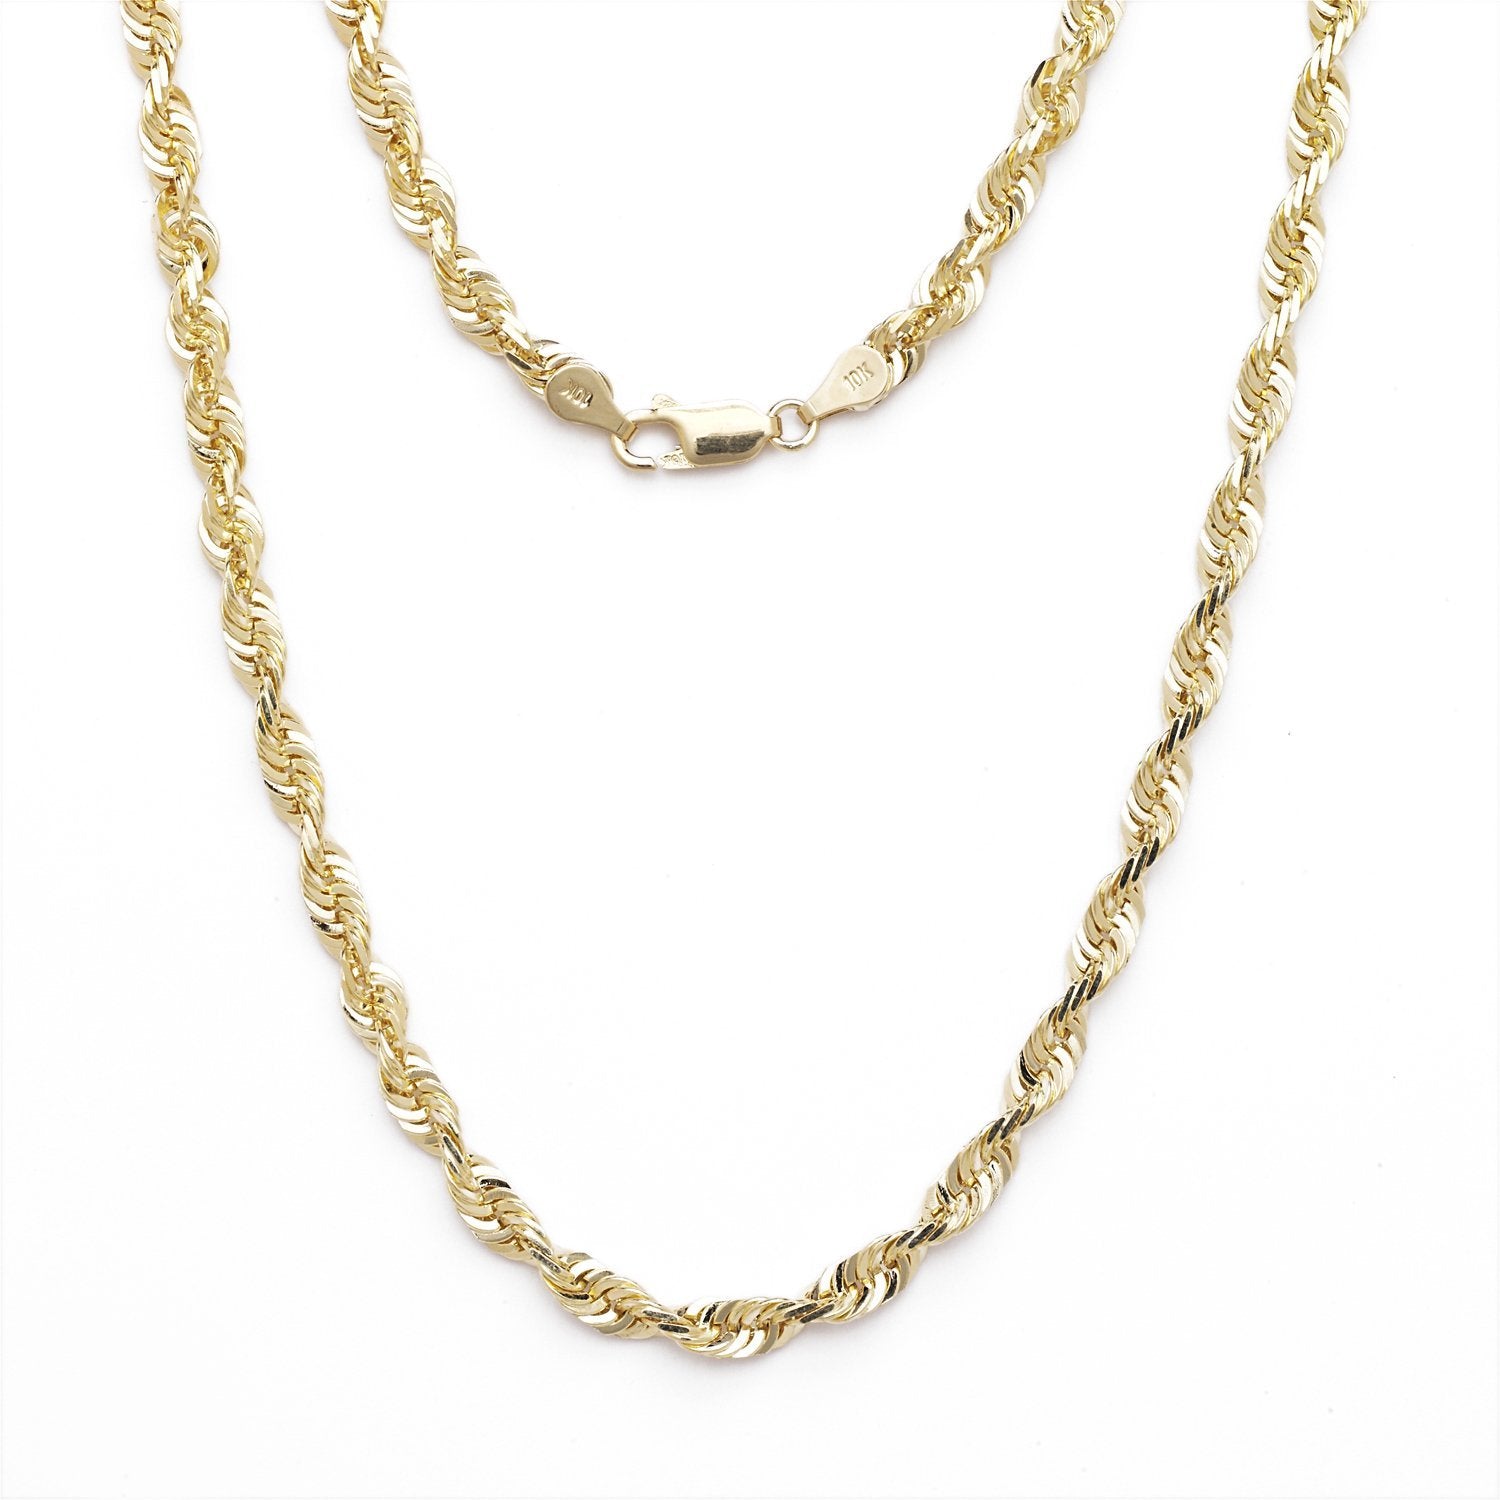 10k Yellow Gold Solid Extra Light Diamond Cut Rope Chain Necklace, 3mm